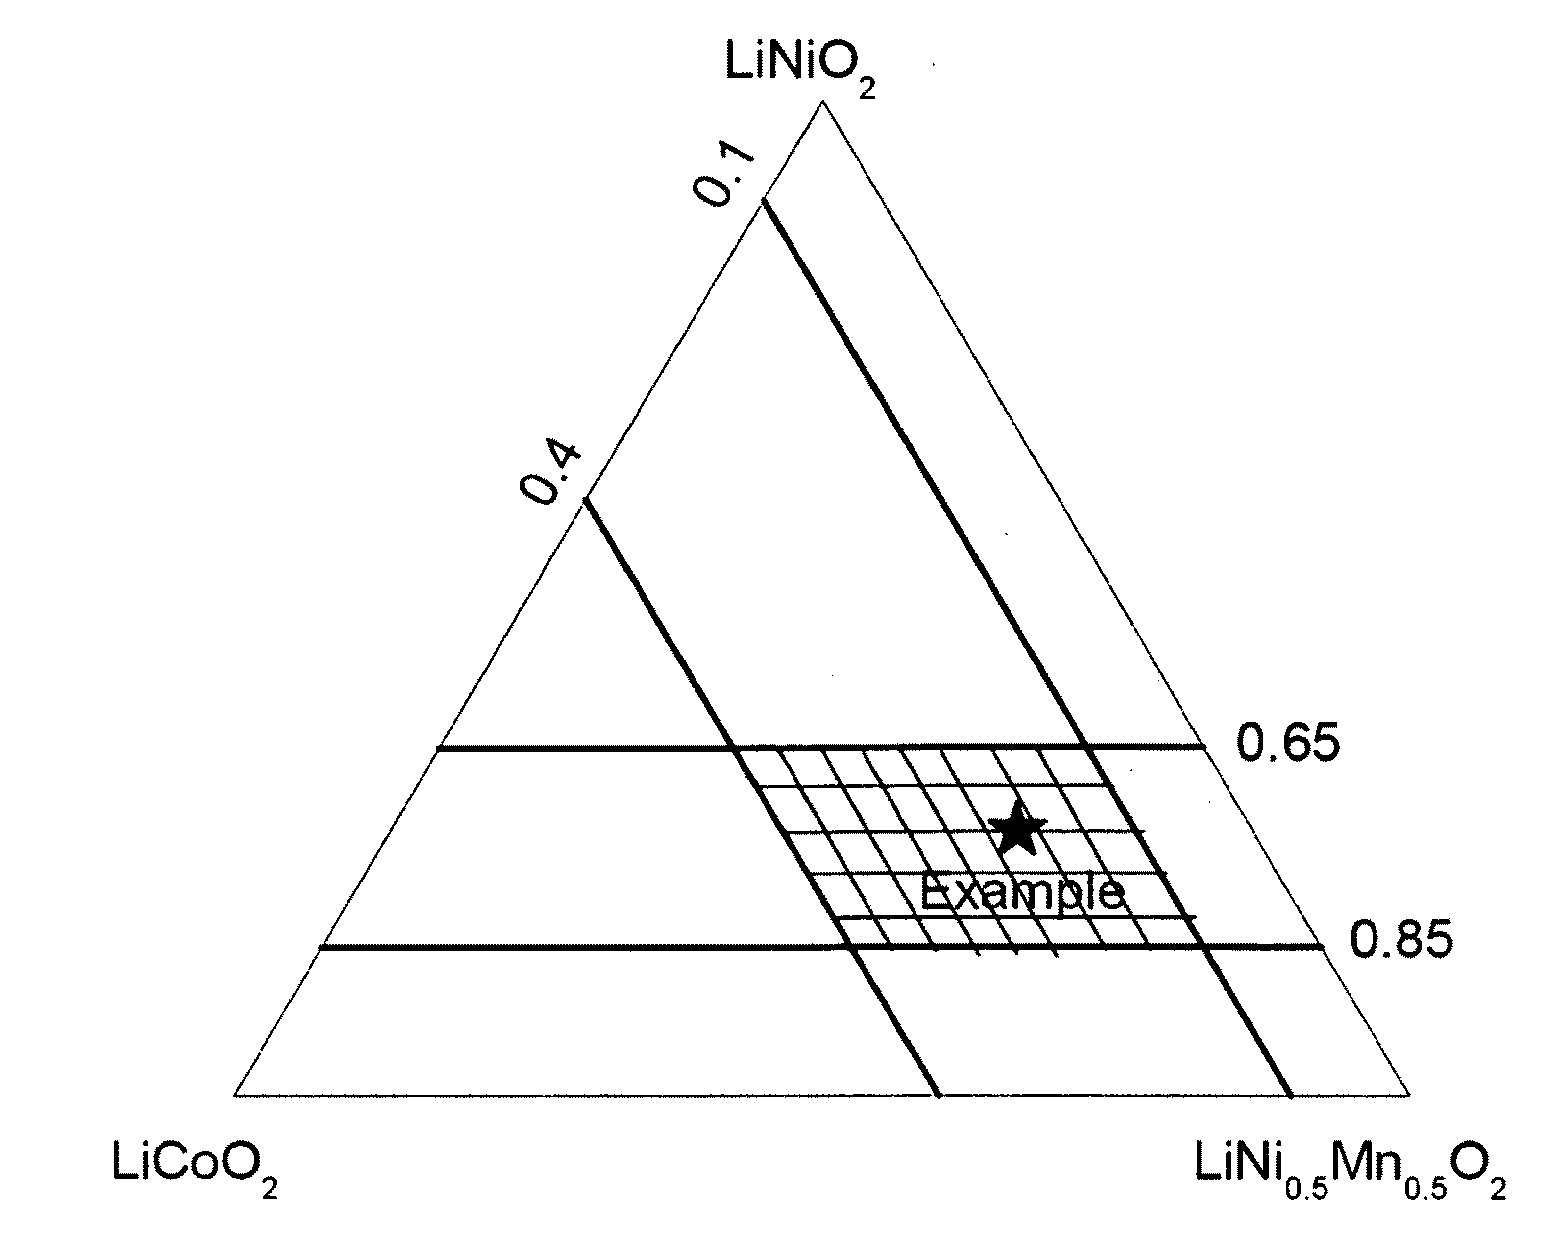 Cathode material containing Ni-based lithium transition metal oxide